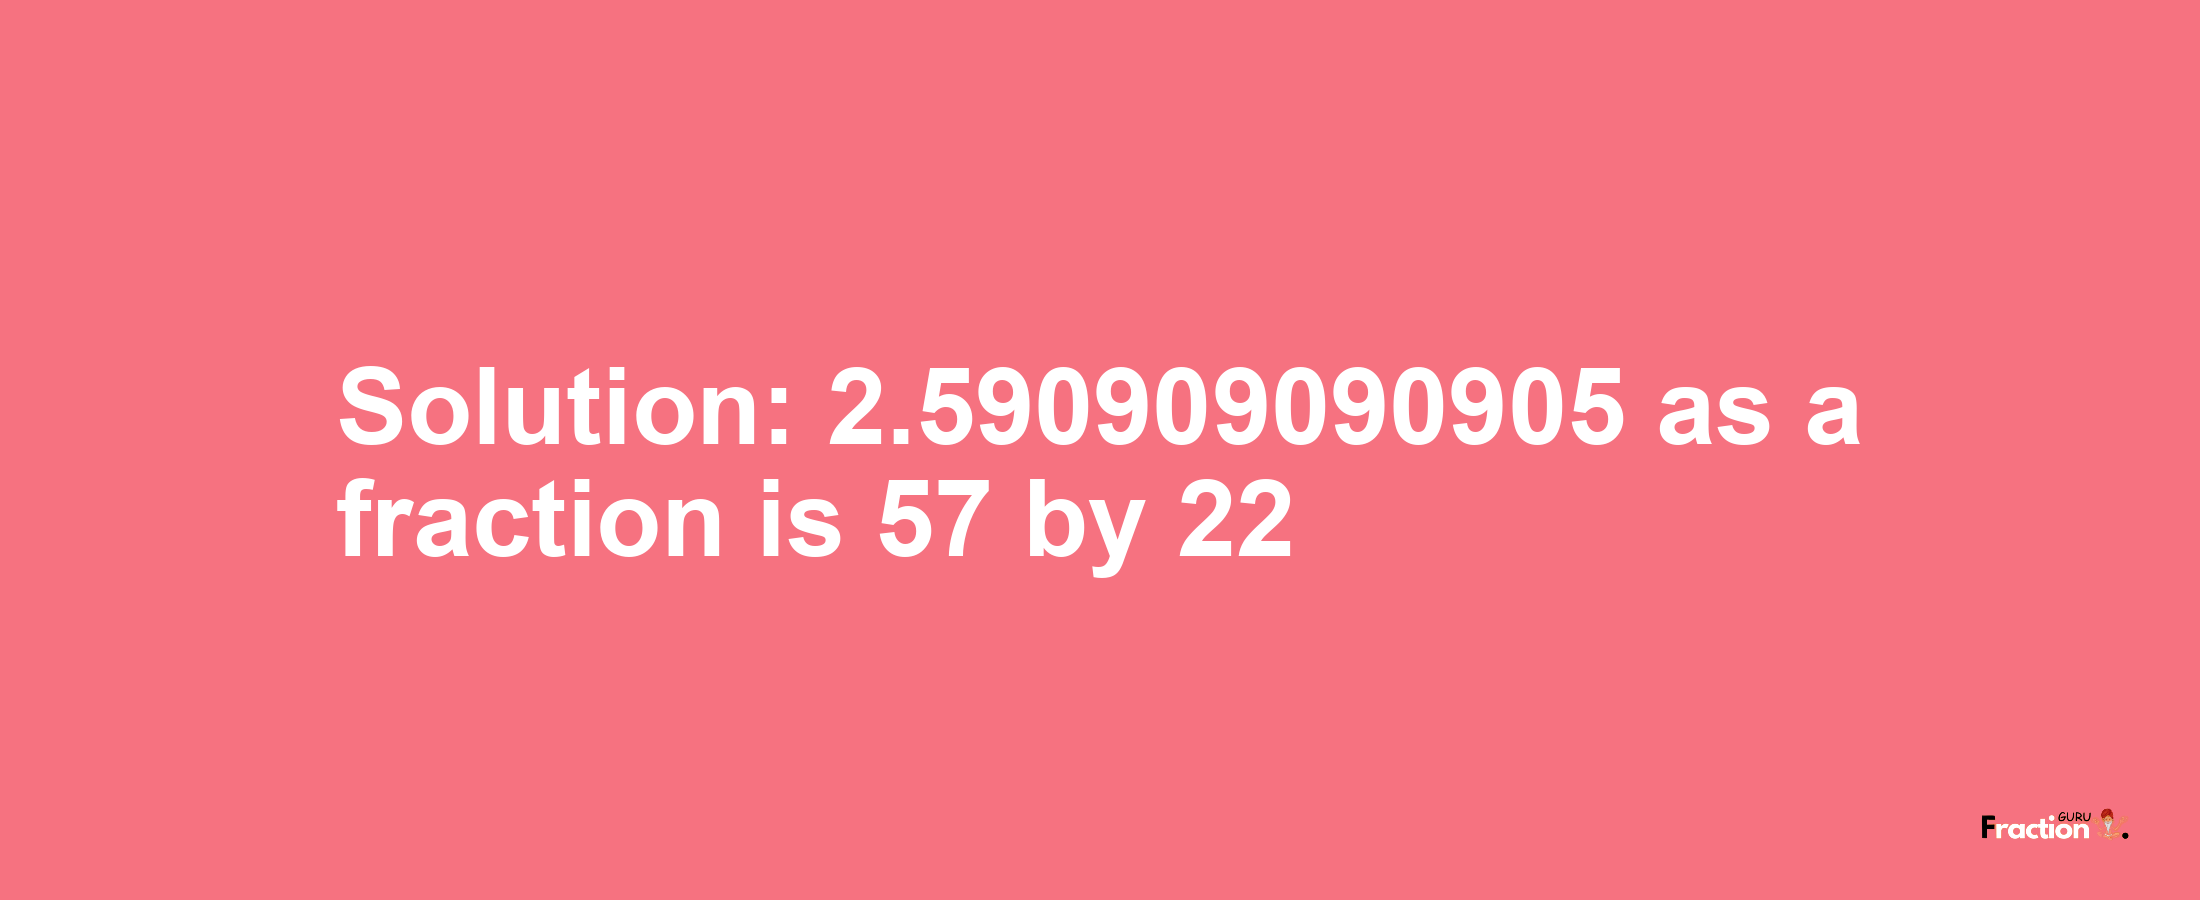 Solution:2.590909090905 as a fraction is 57/22